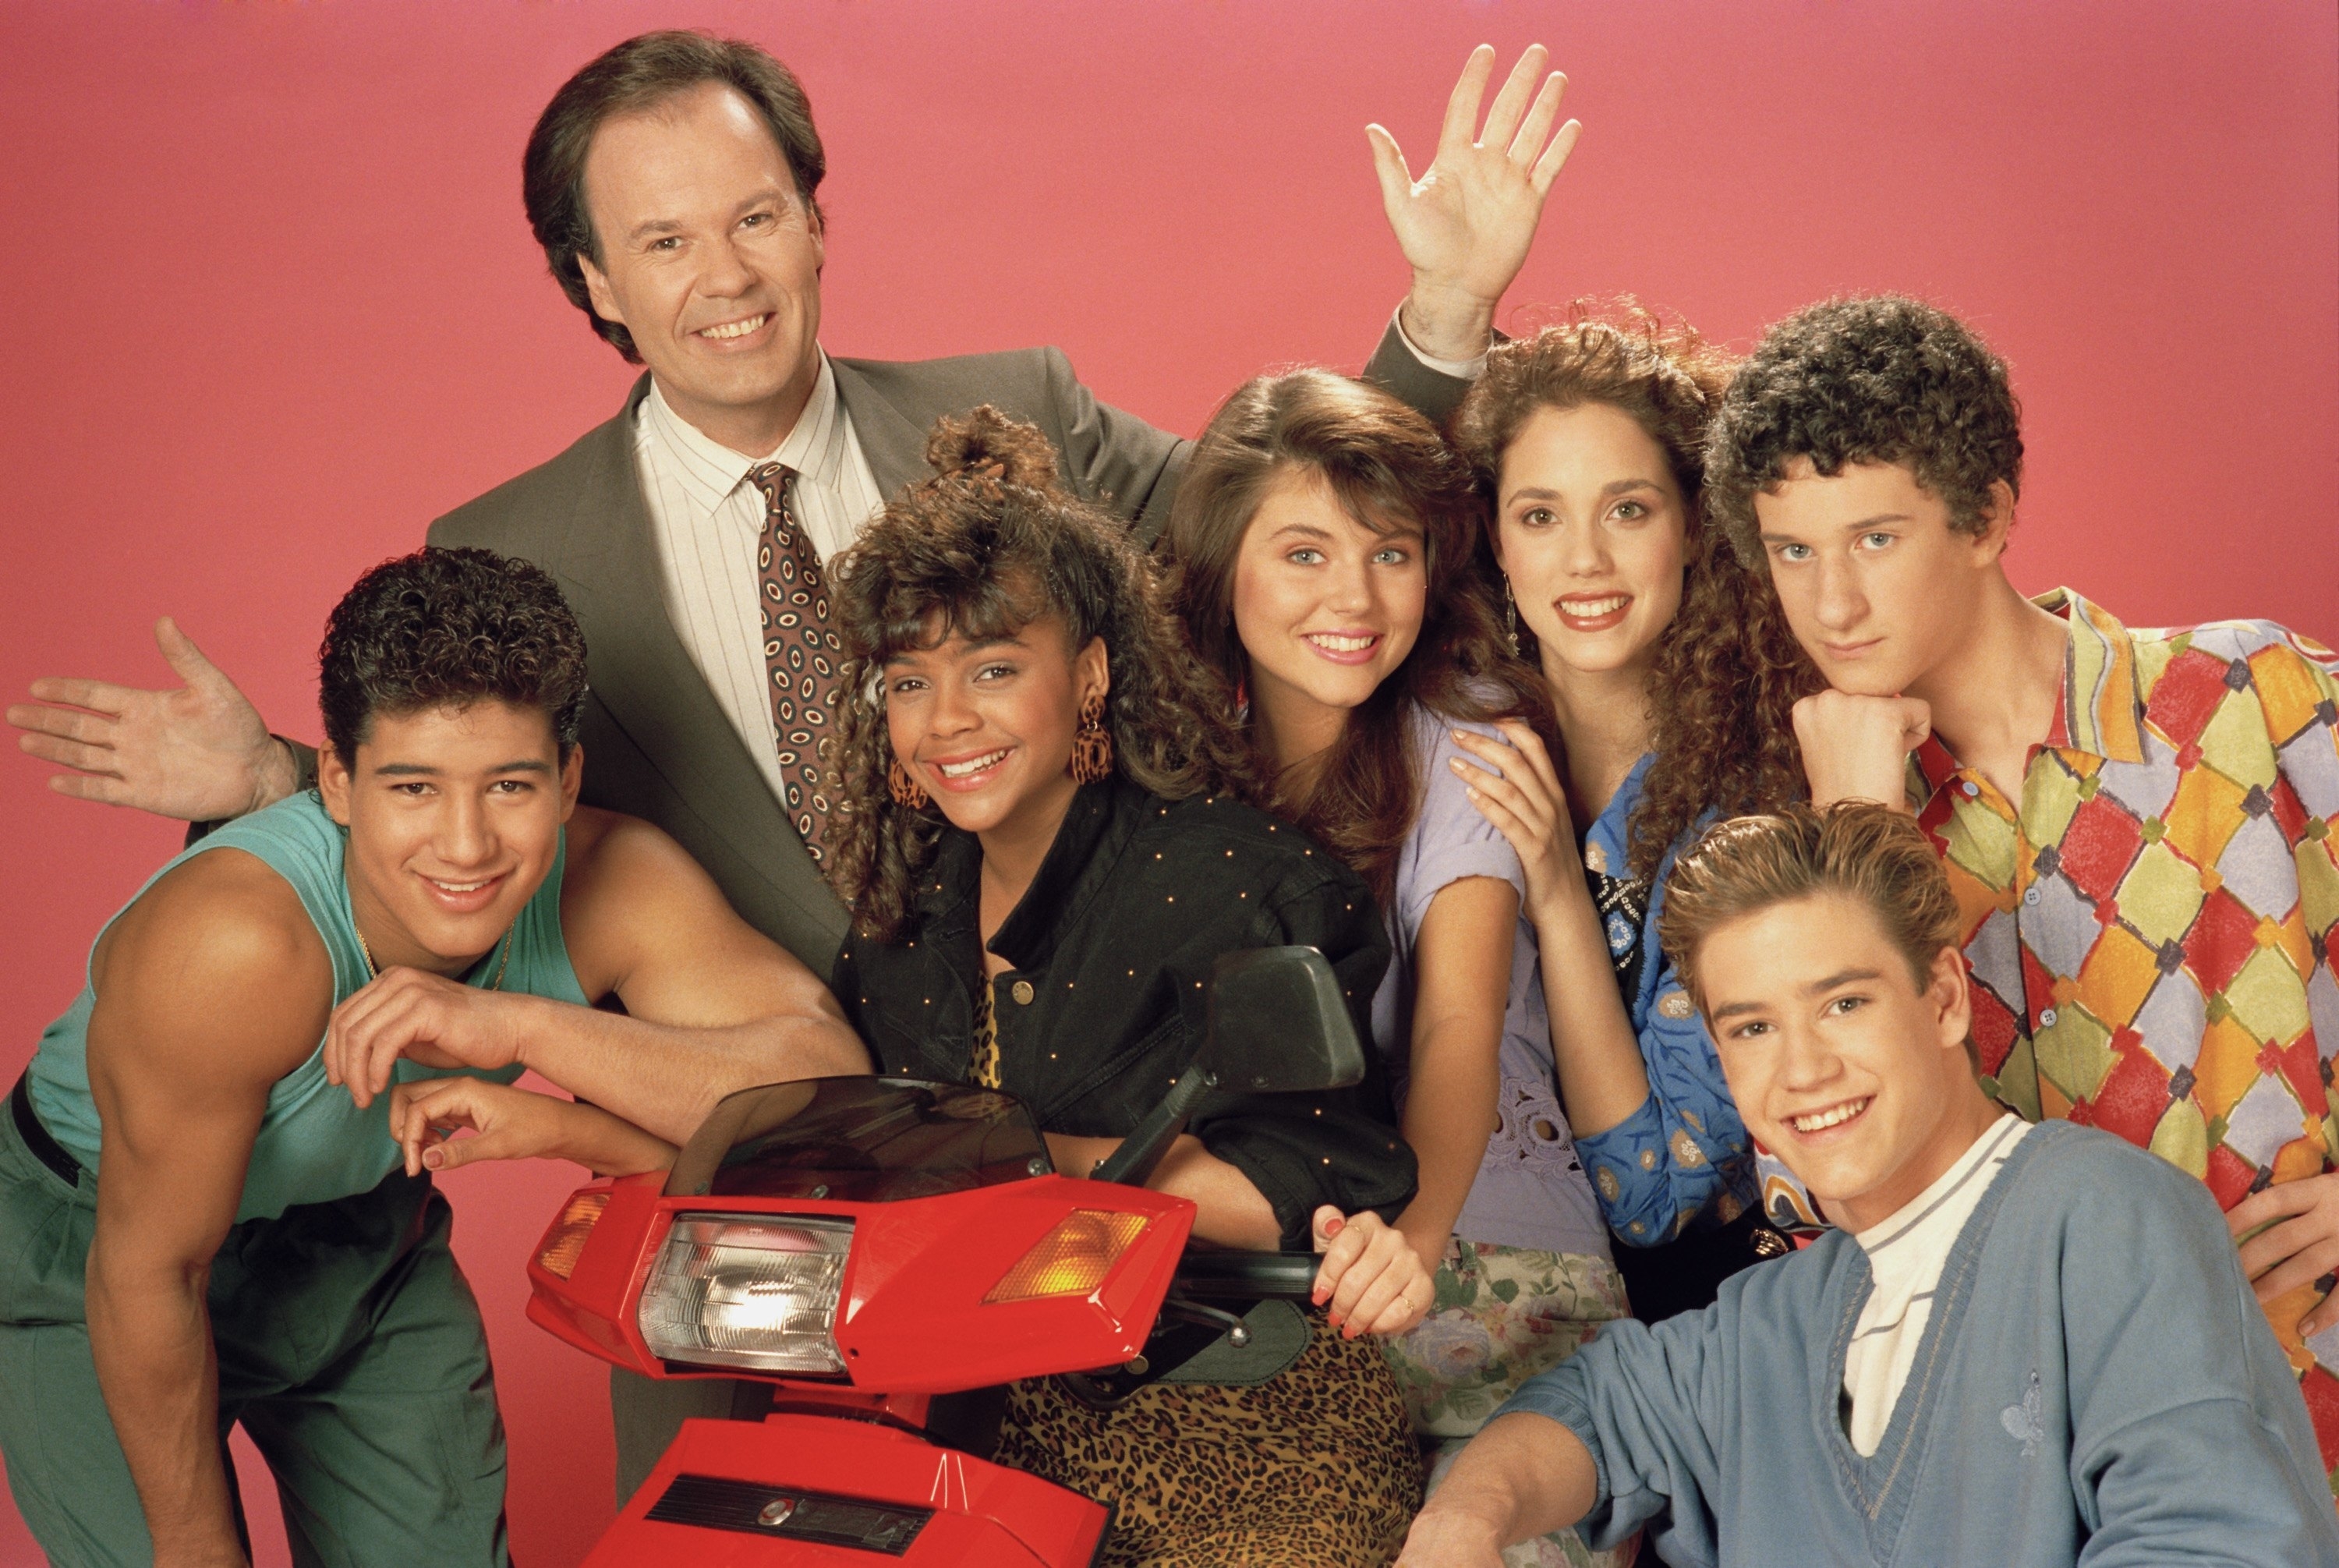 A promo photo featuring the main cast of Saved By The Bell